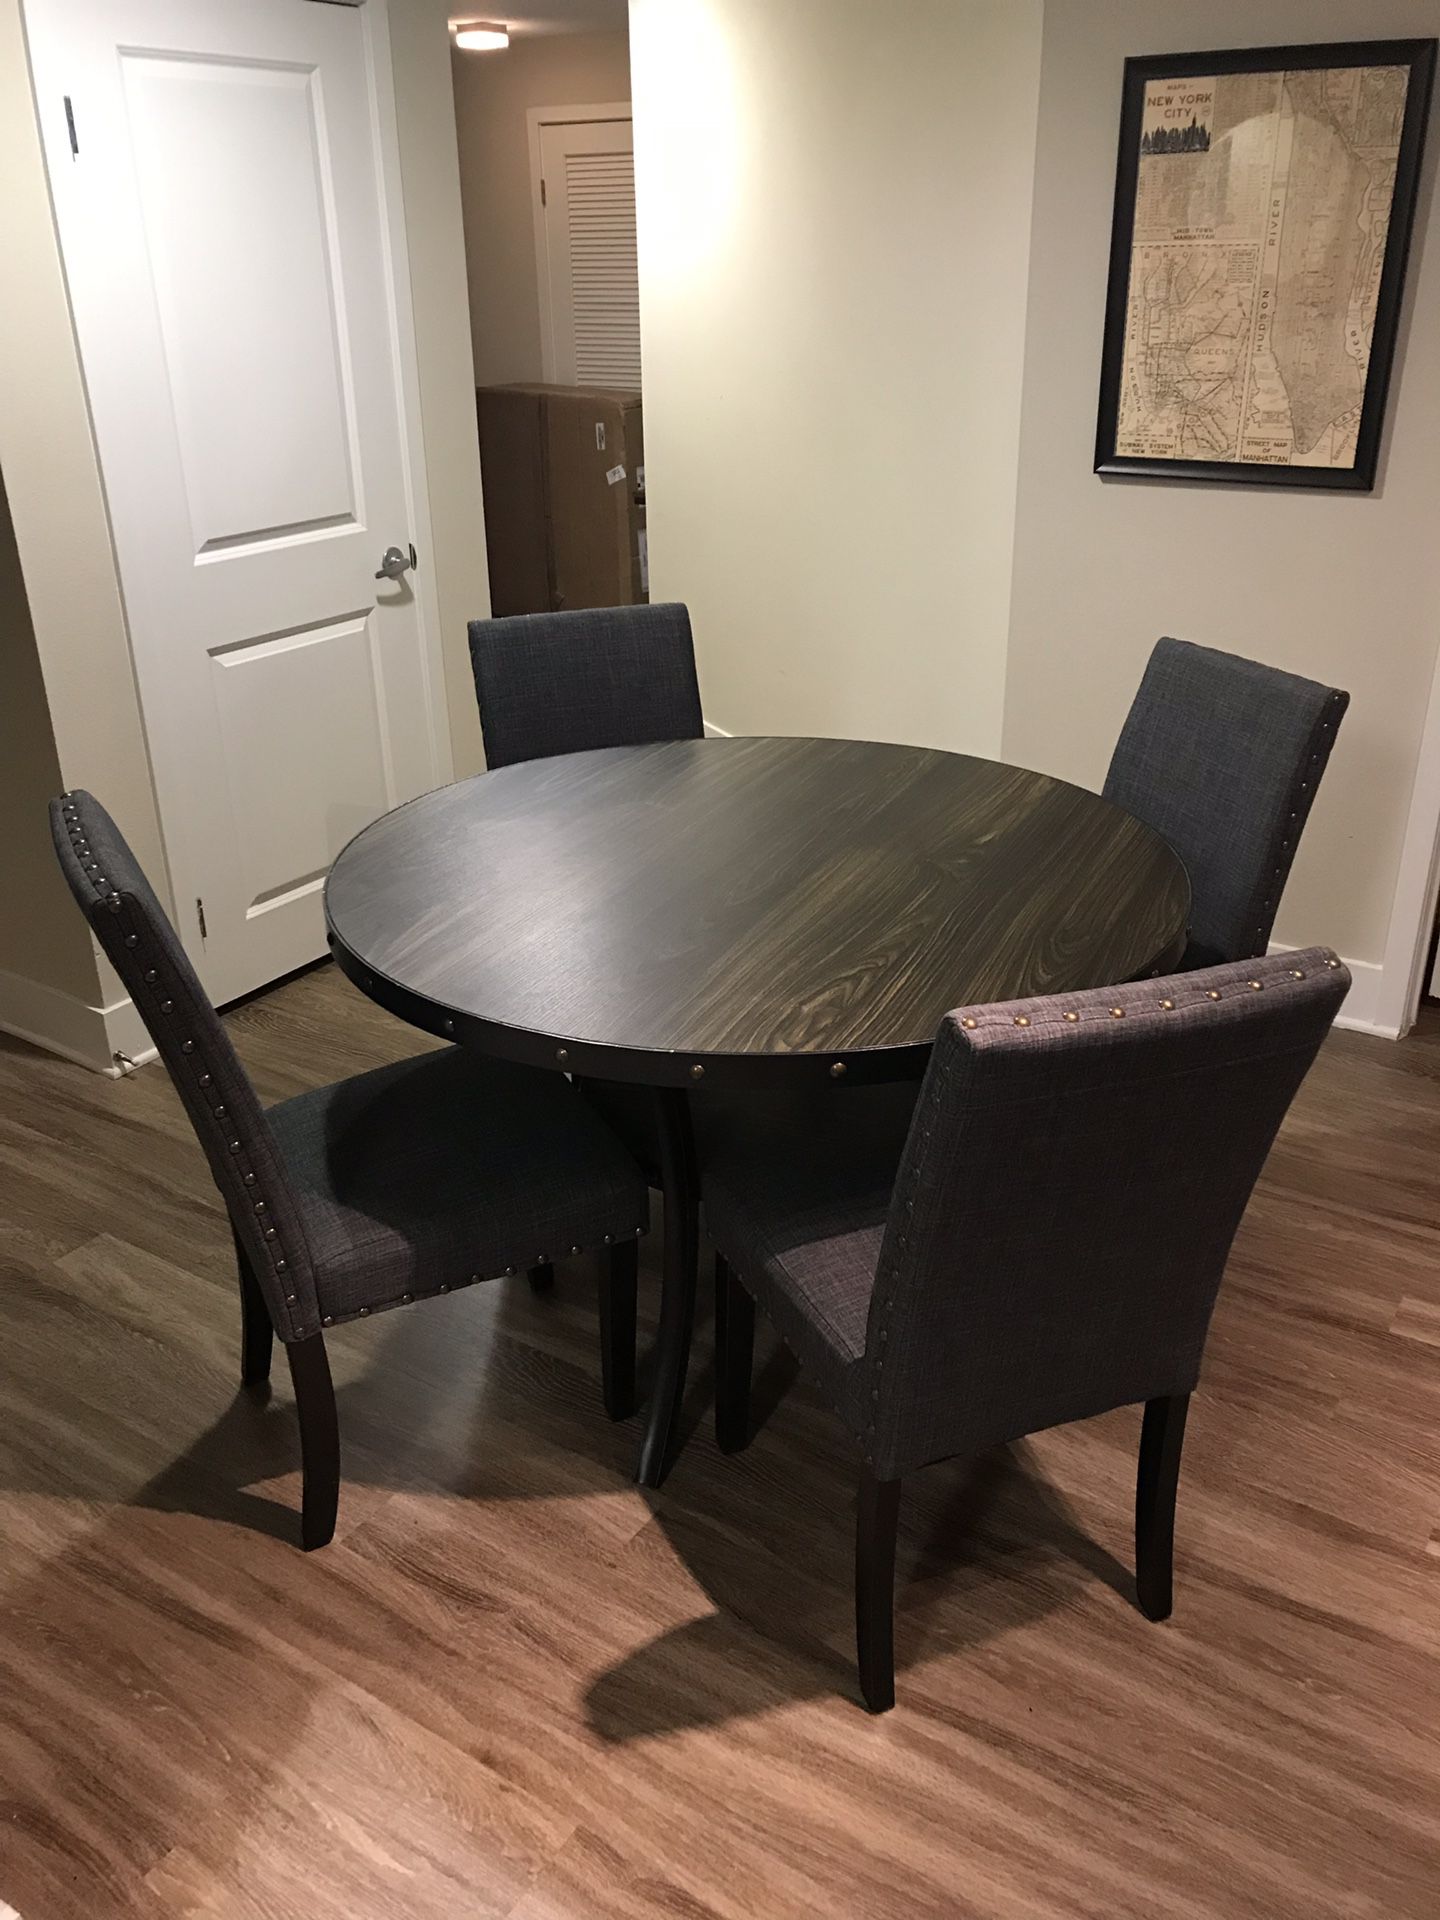 Almost new dining table and chairs